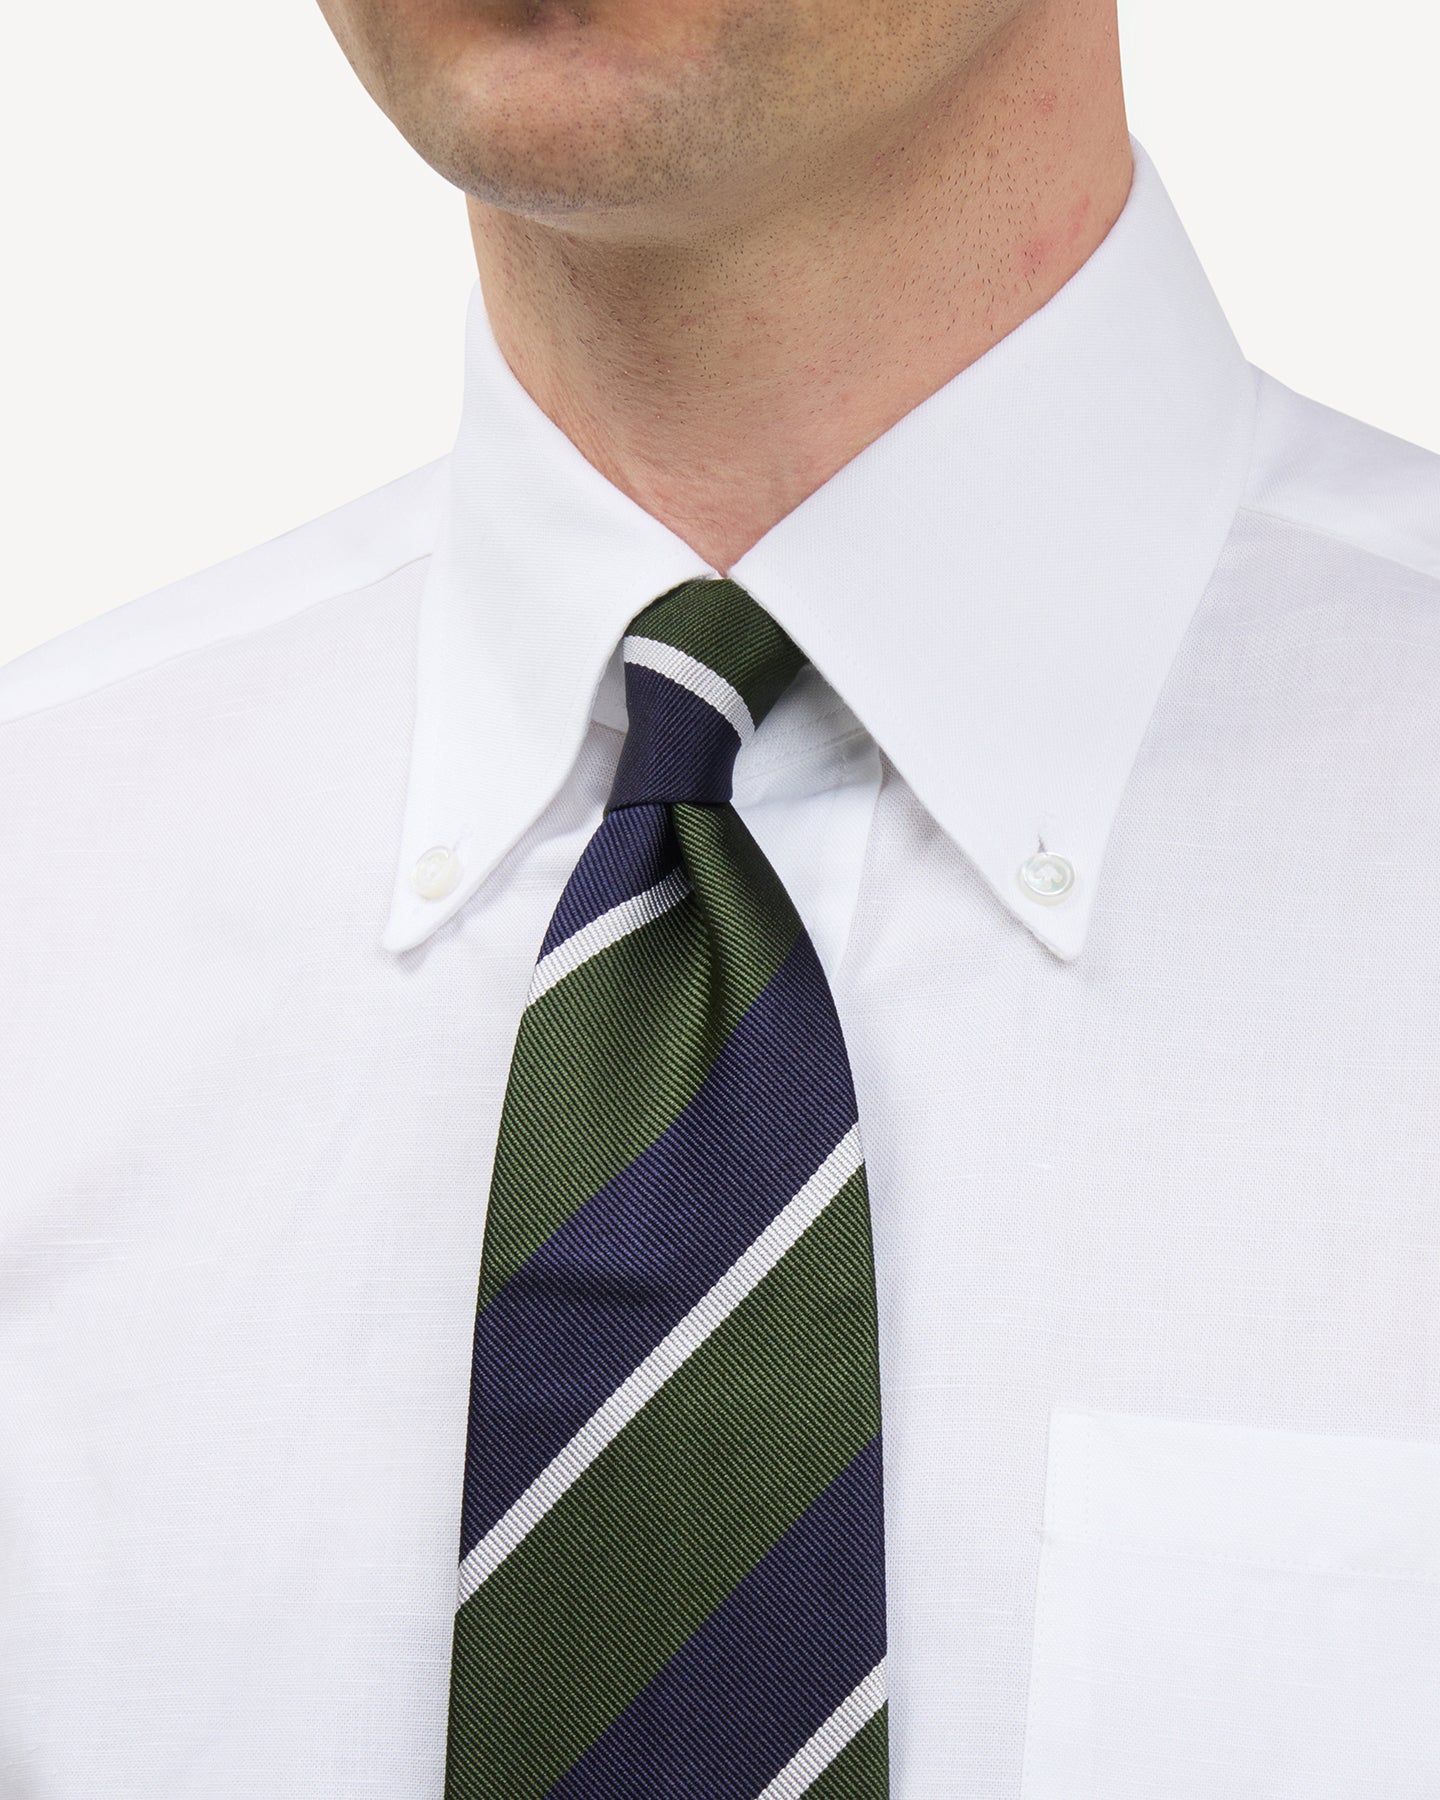 Man wearing a white button down shirt and a navy, green and white regimental stripe repp tie